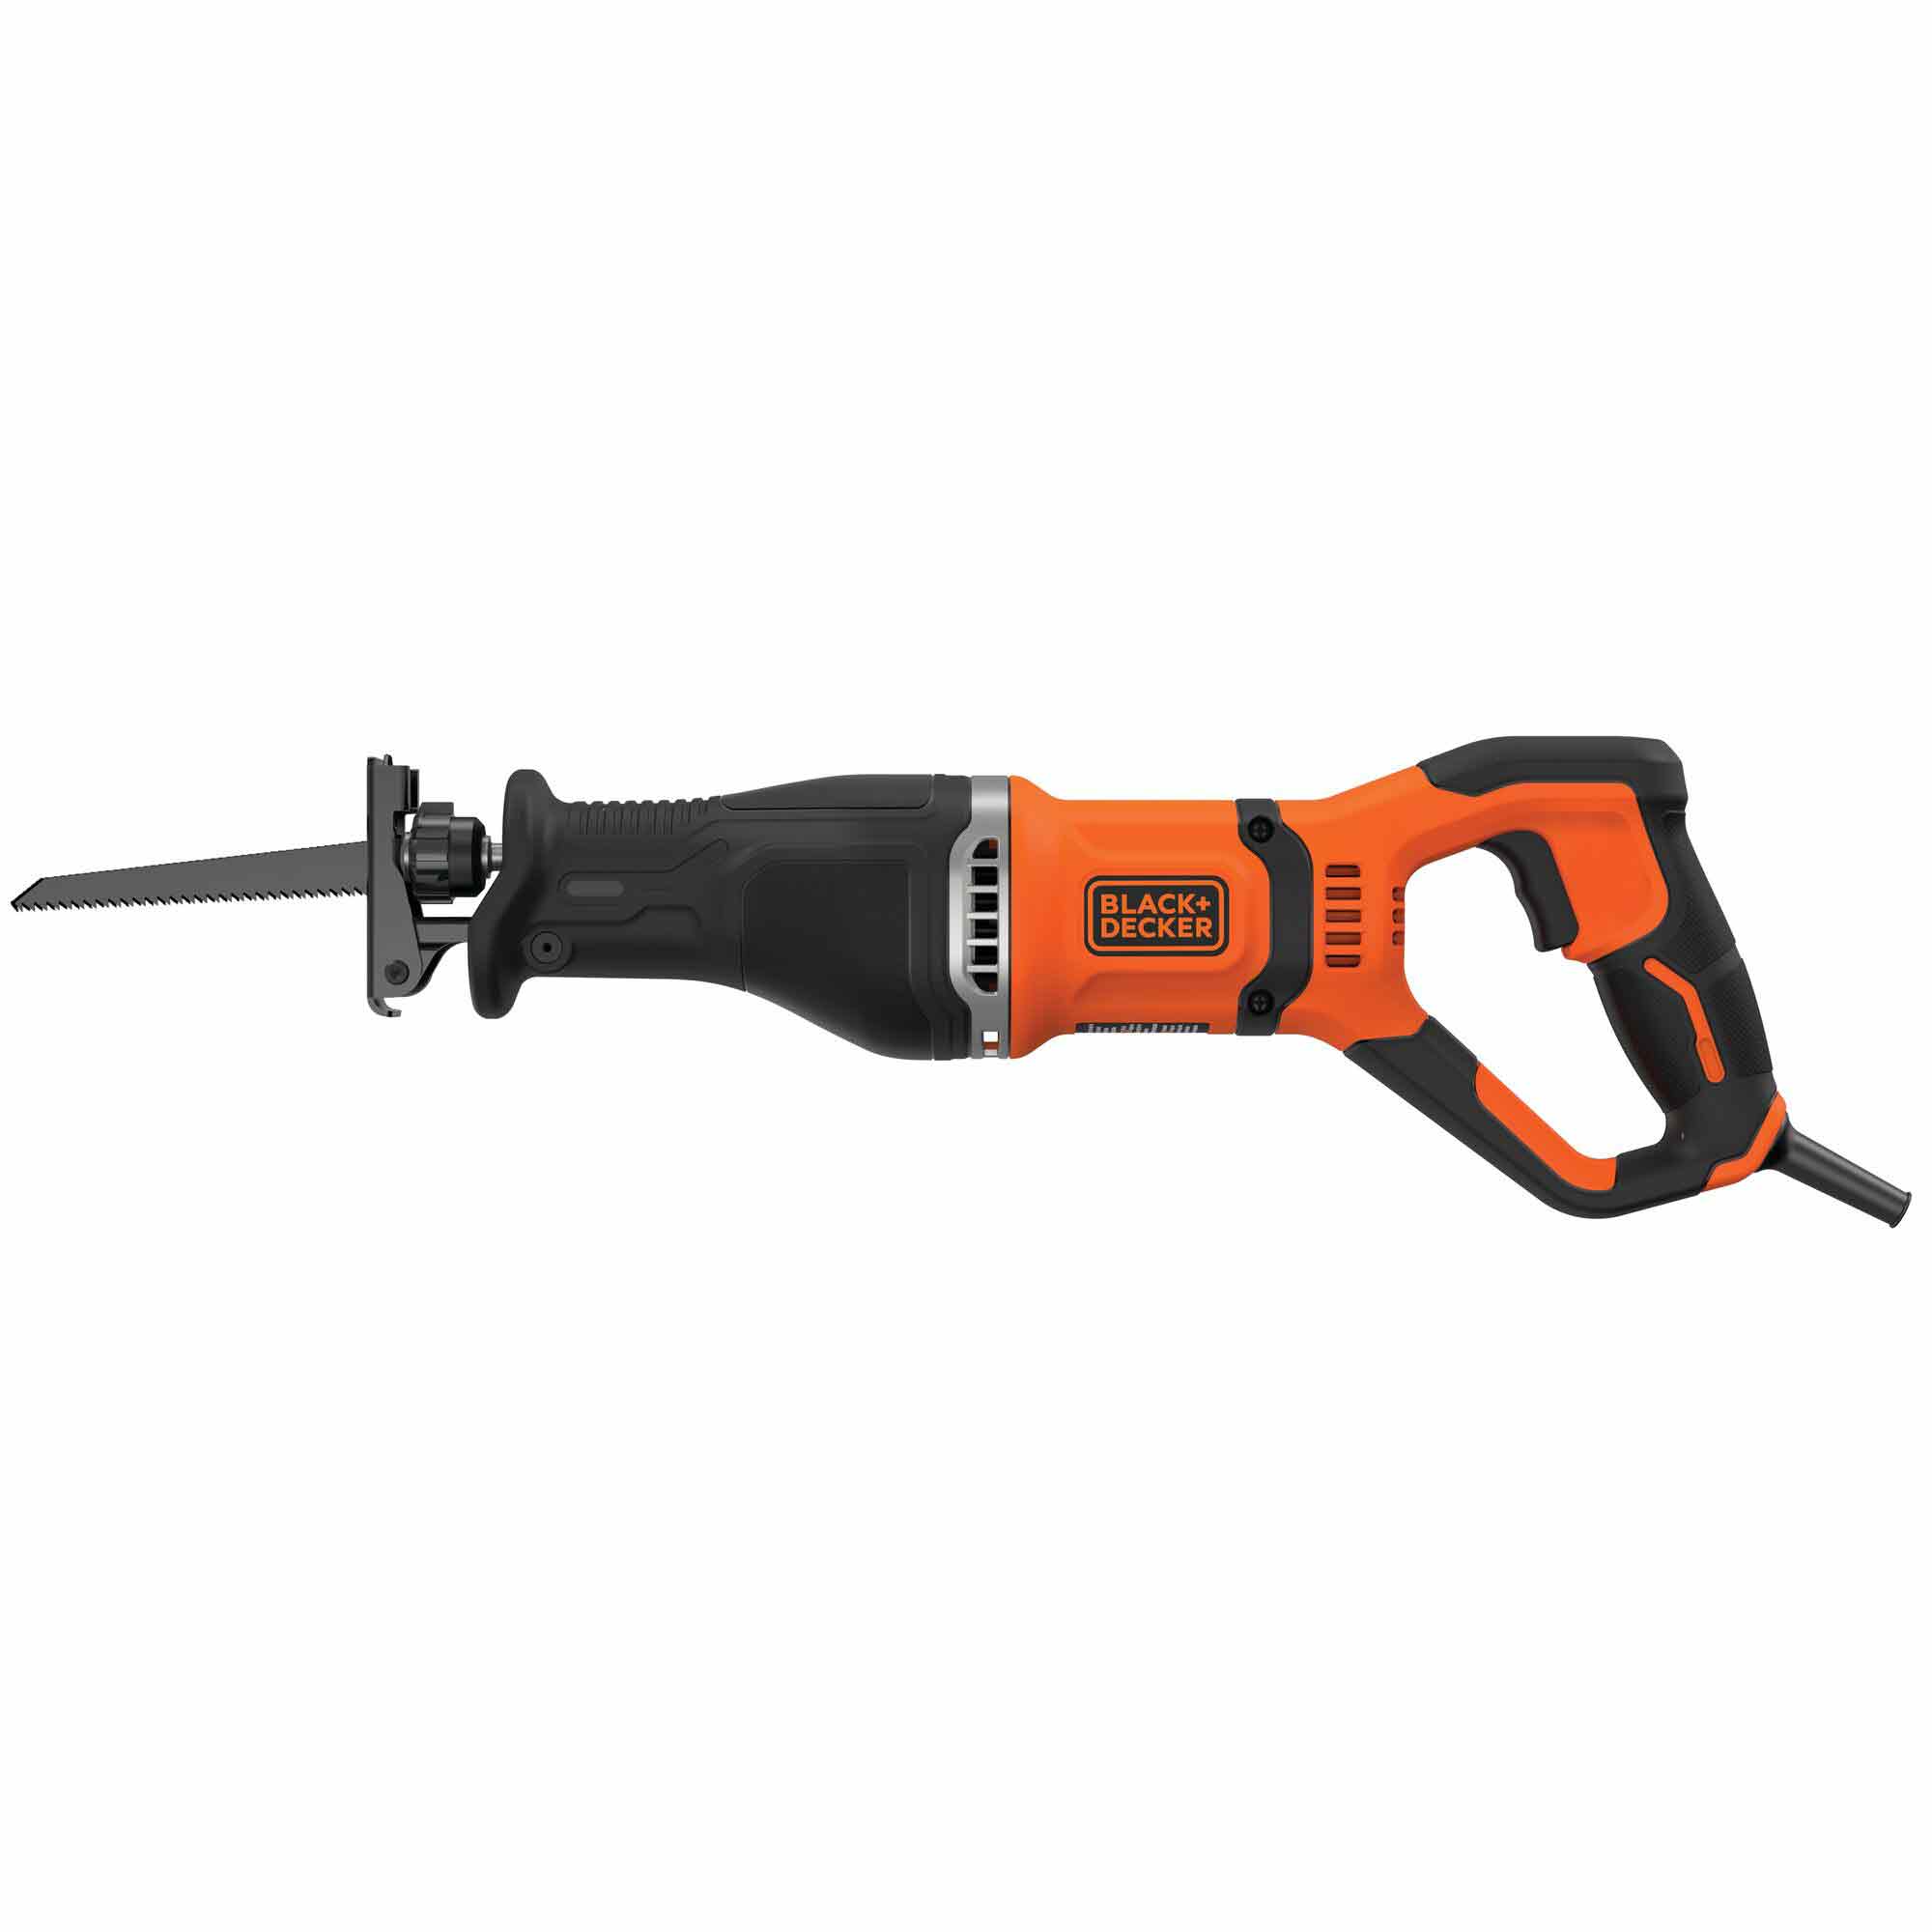 https://www.toolstoreuk.co.uk/images/products/large/21122_145638.jpg